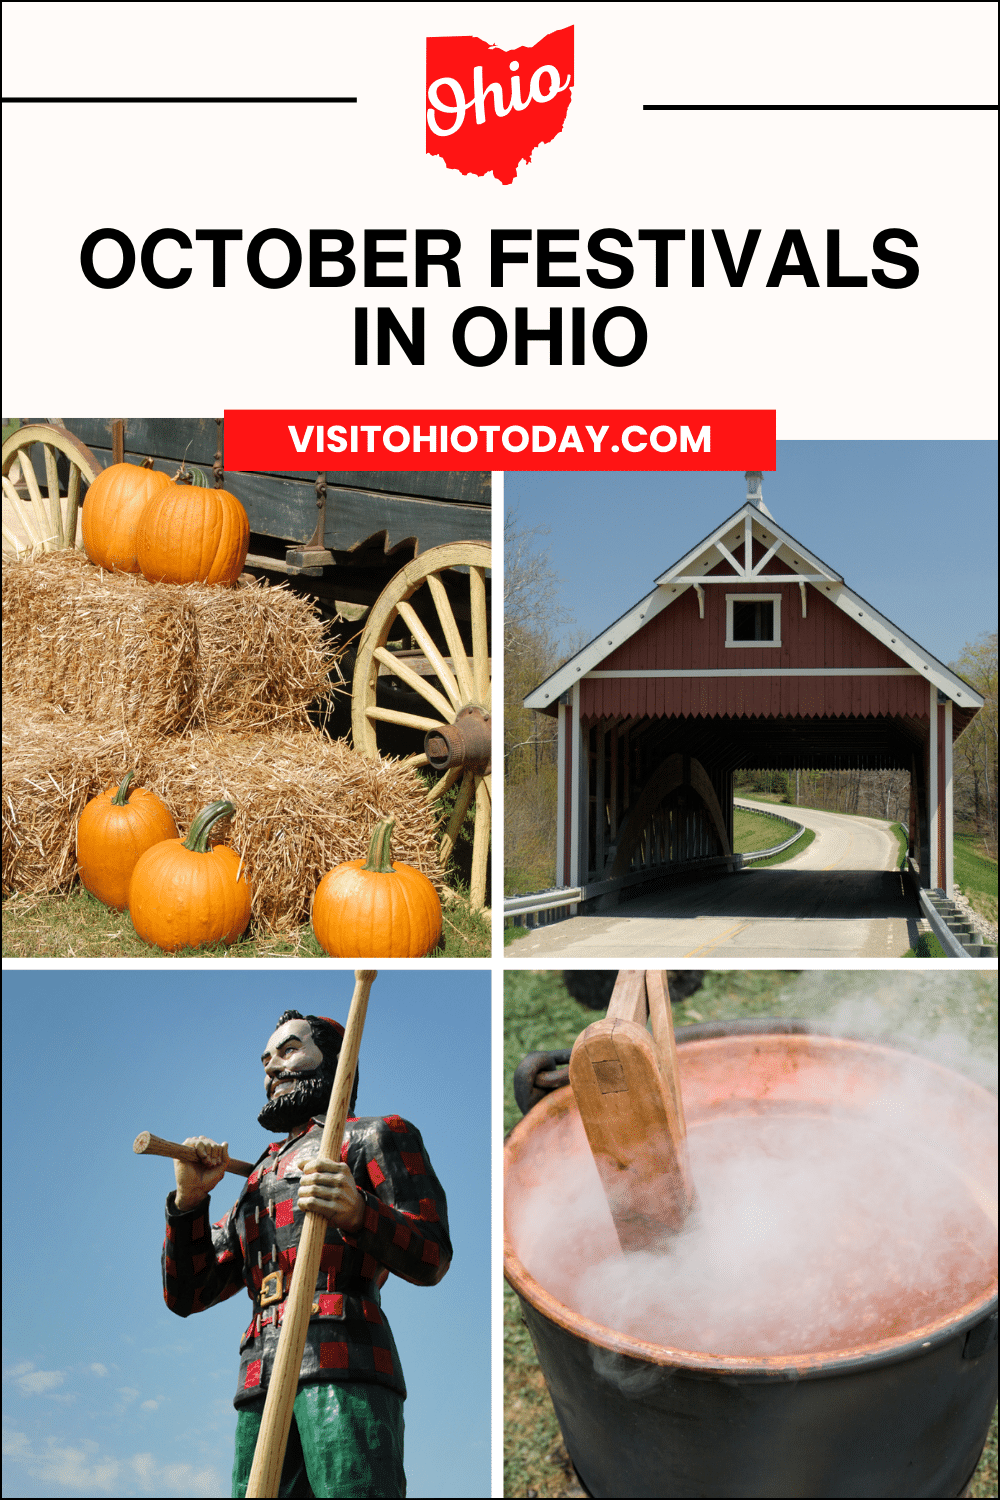 October is the month to celebrate both fall and Halloween. This list of October festivals in Ohio will help you find ones you may like to visit.